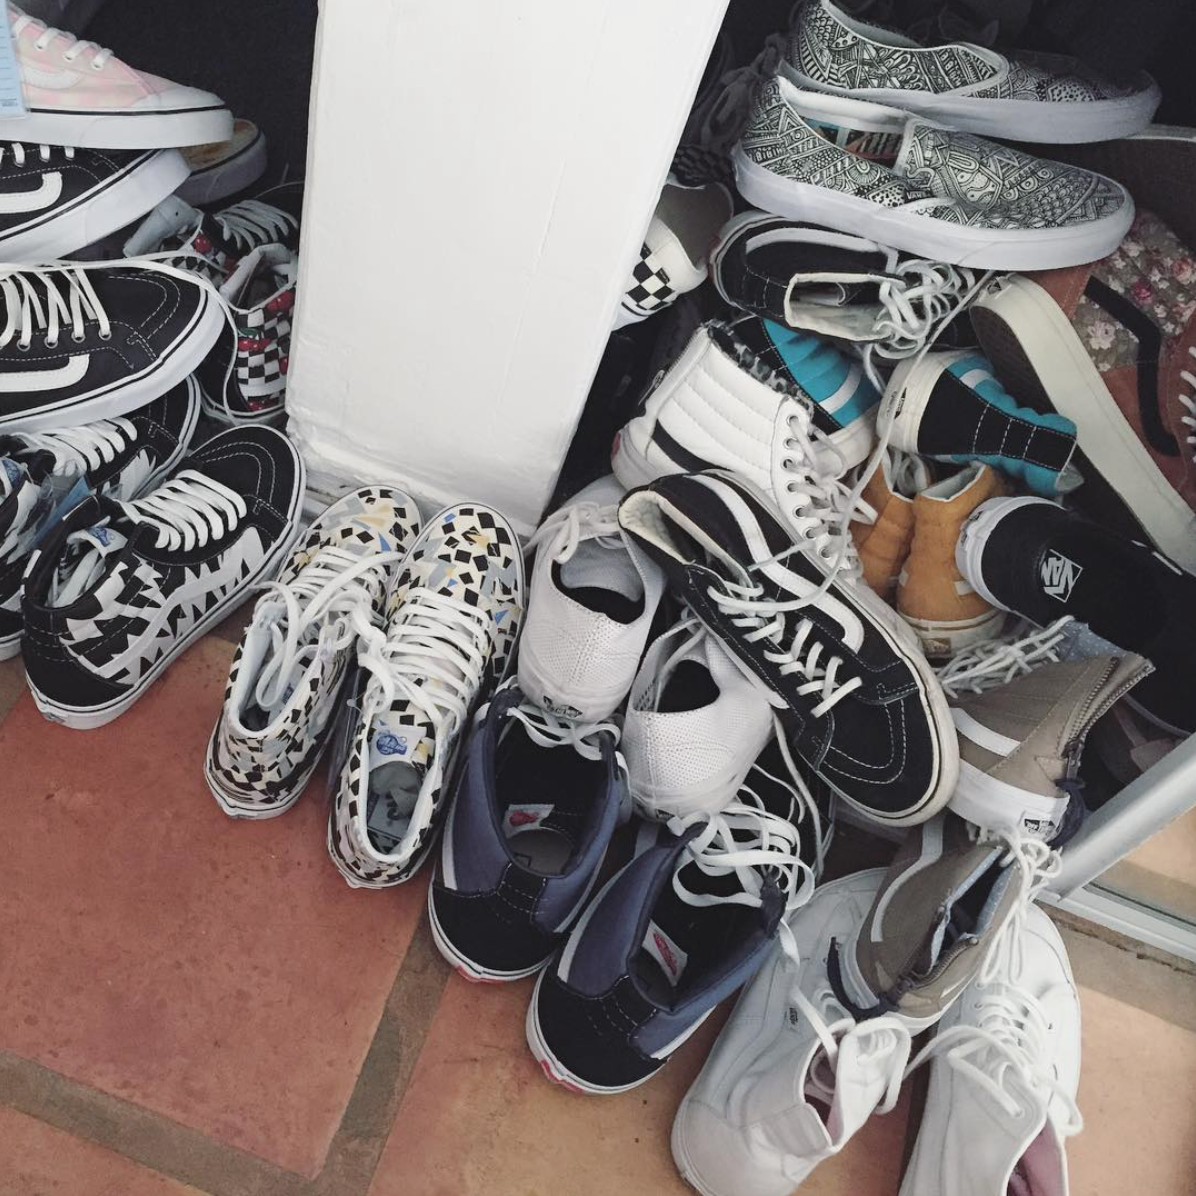 Some may call it hoarding, we call it G O A L... - Vans Girls